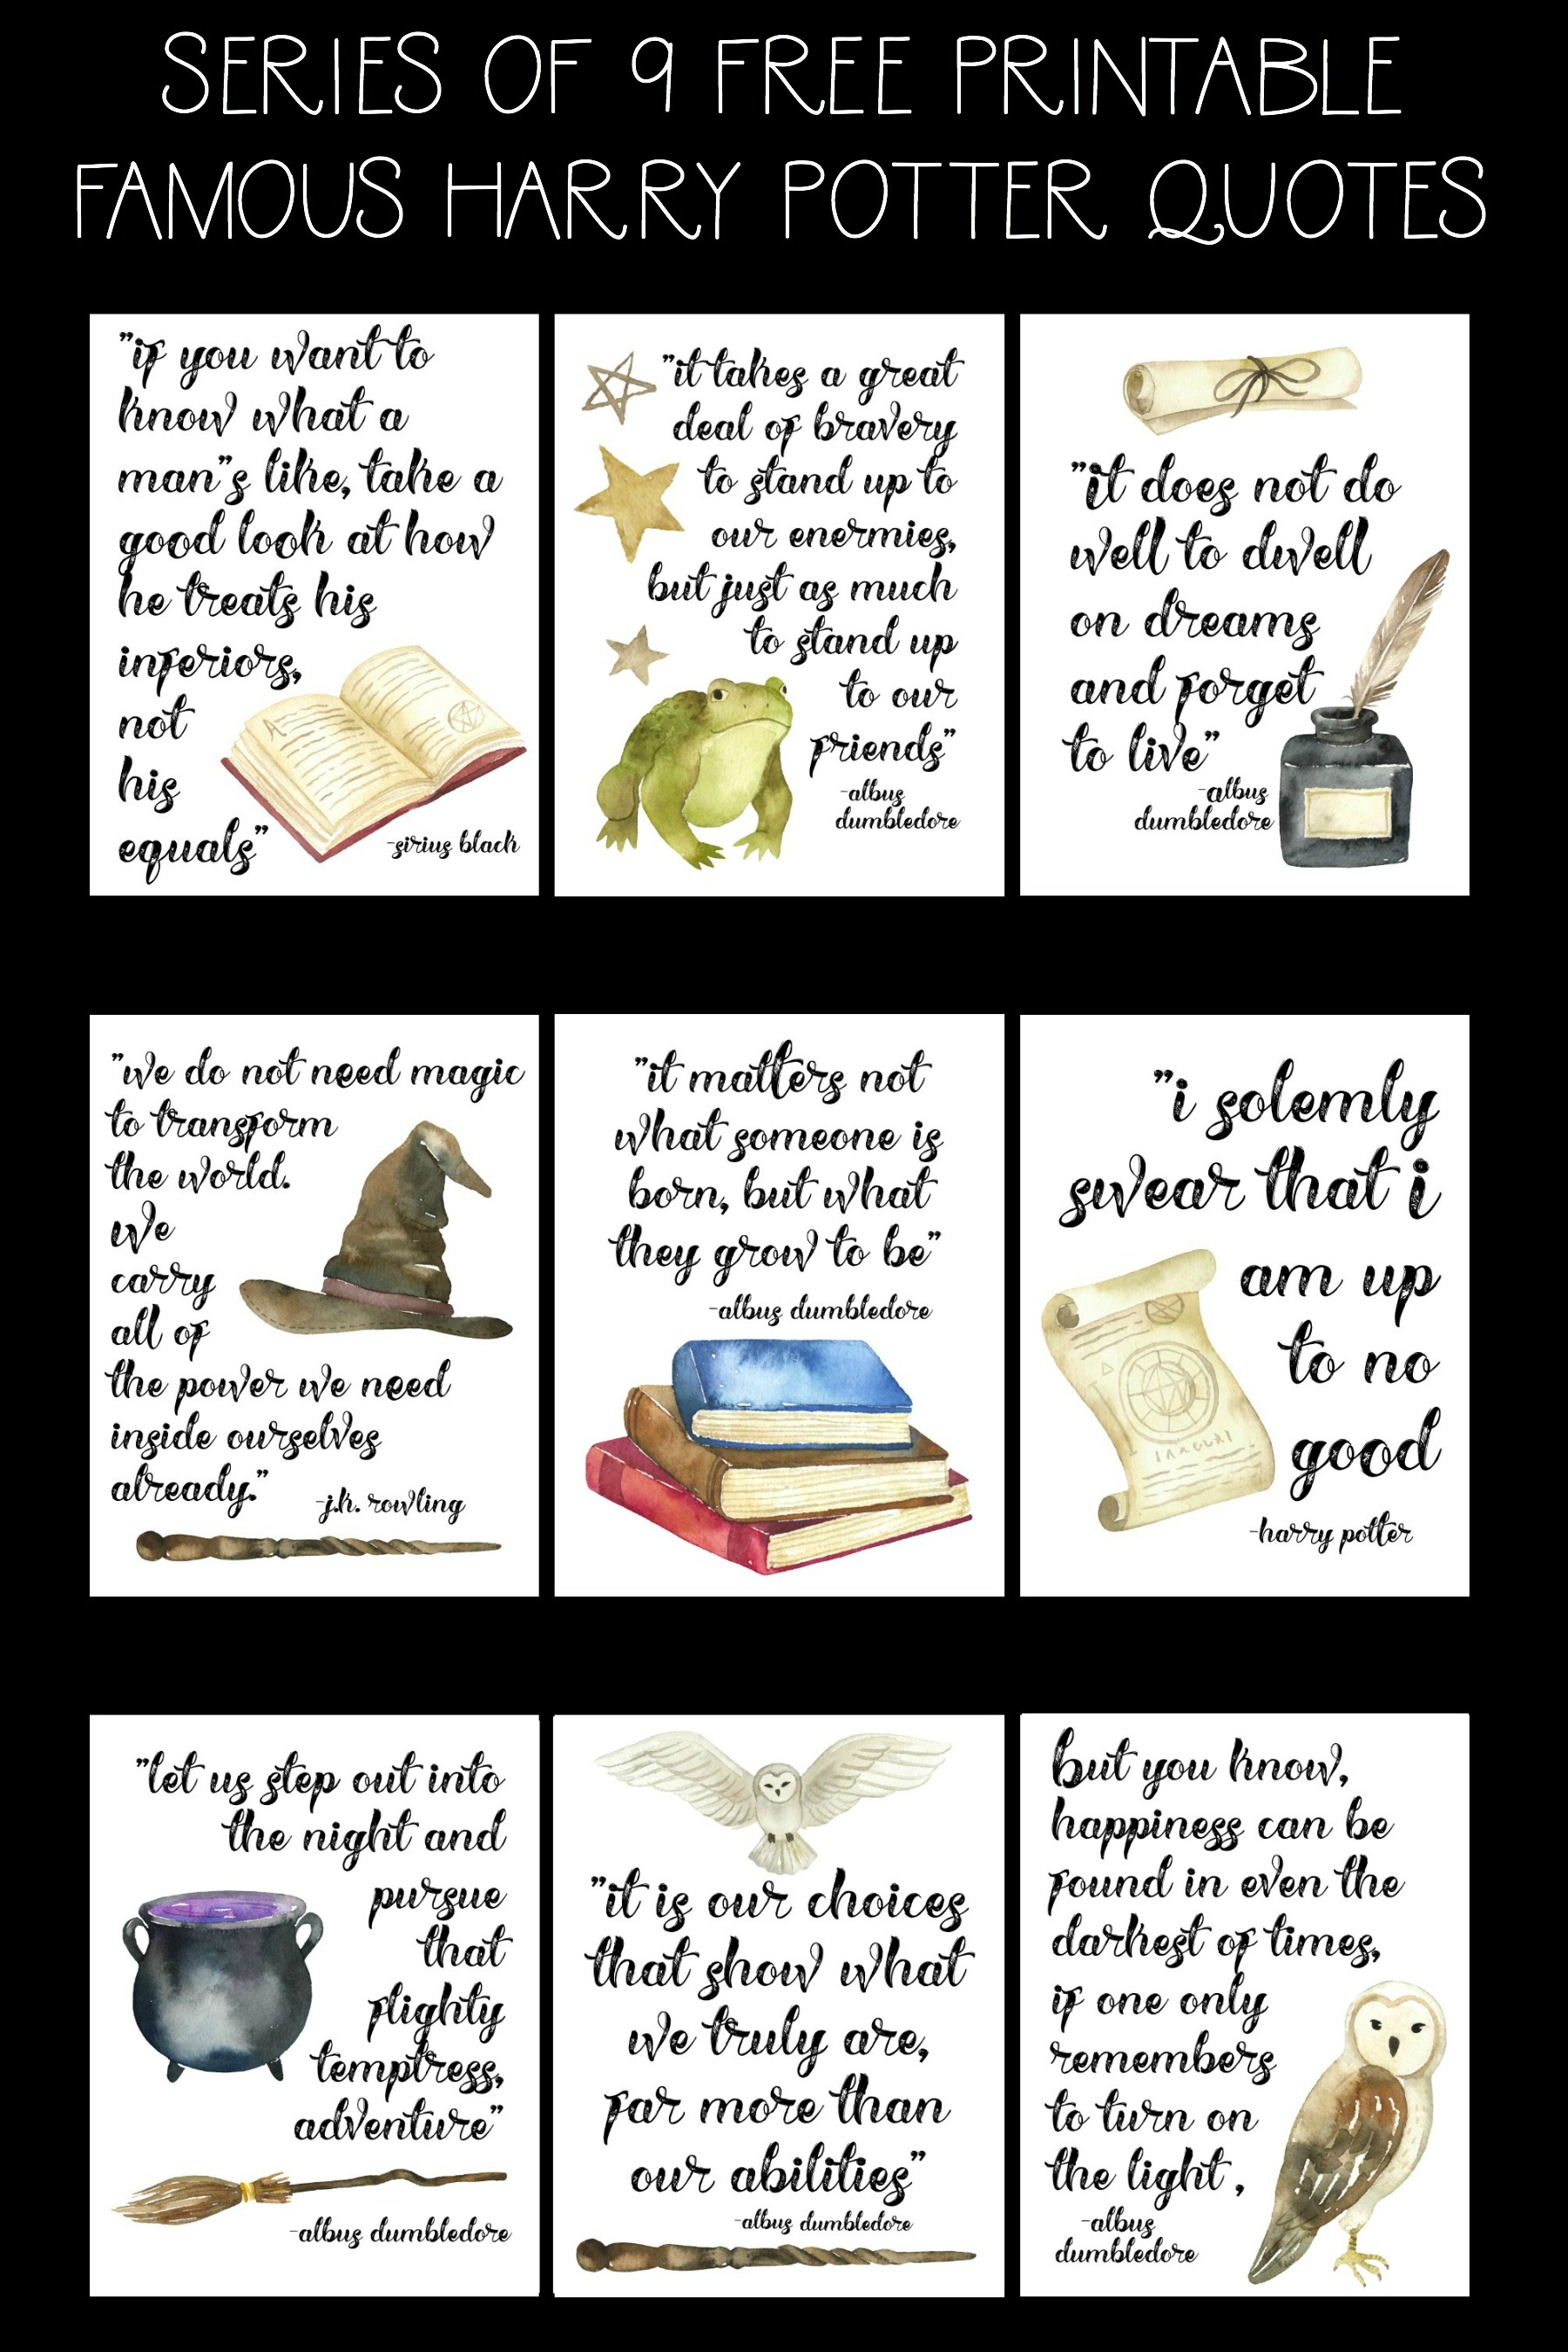 Series Of 9 Free Printable Famous Harry Potter Quotes poster.